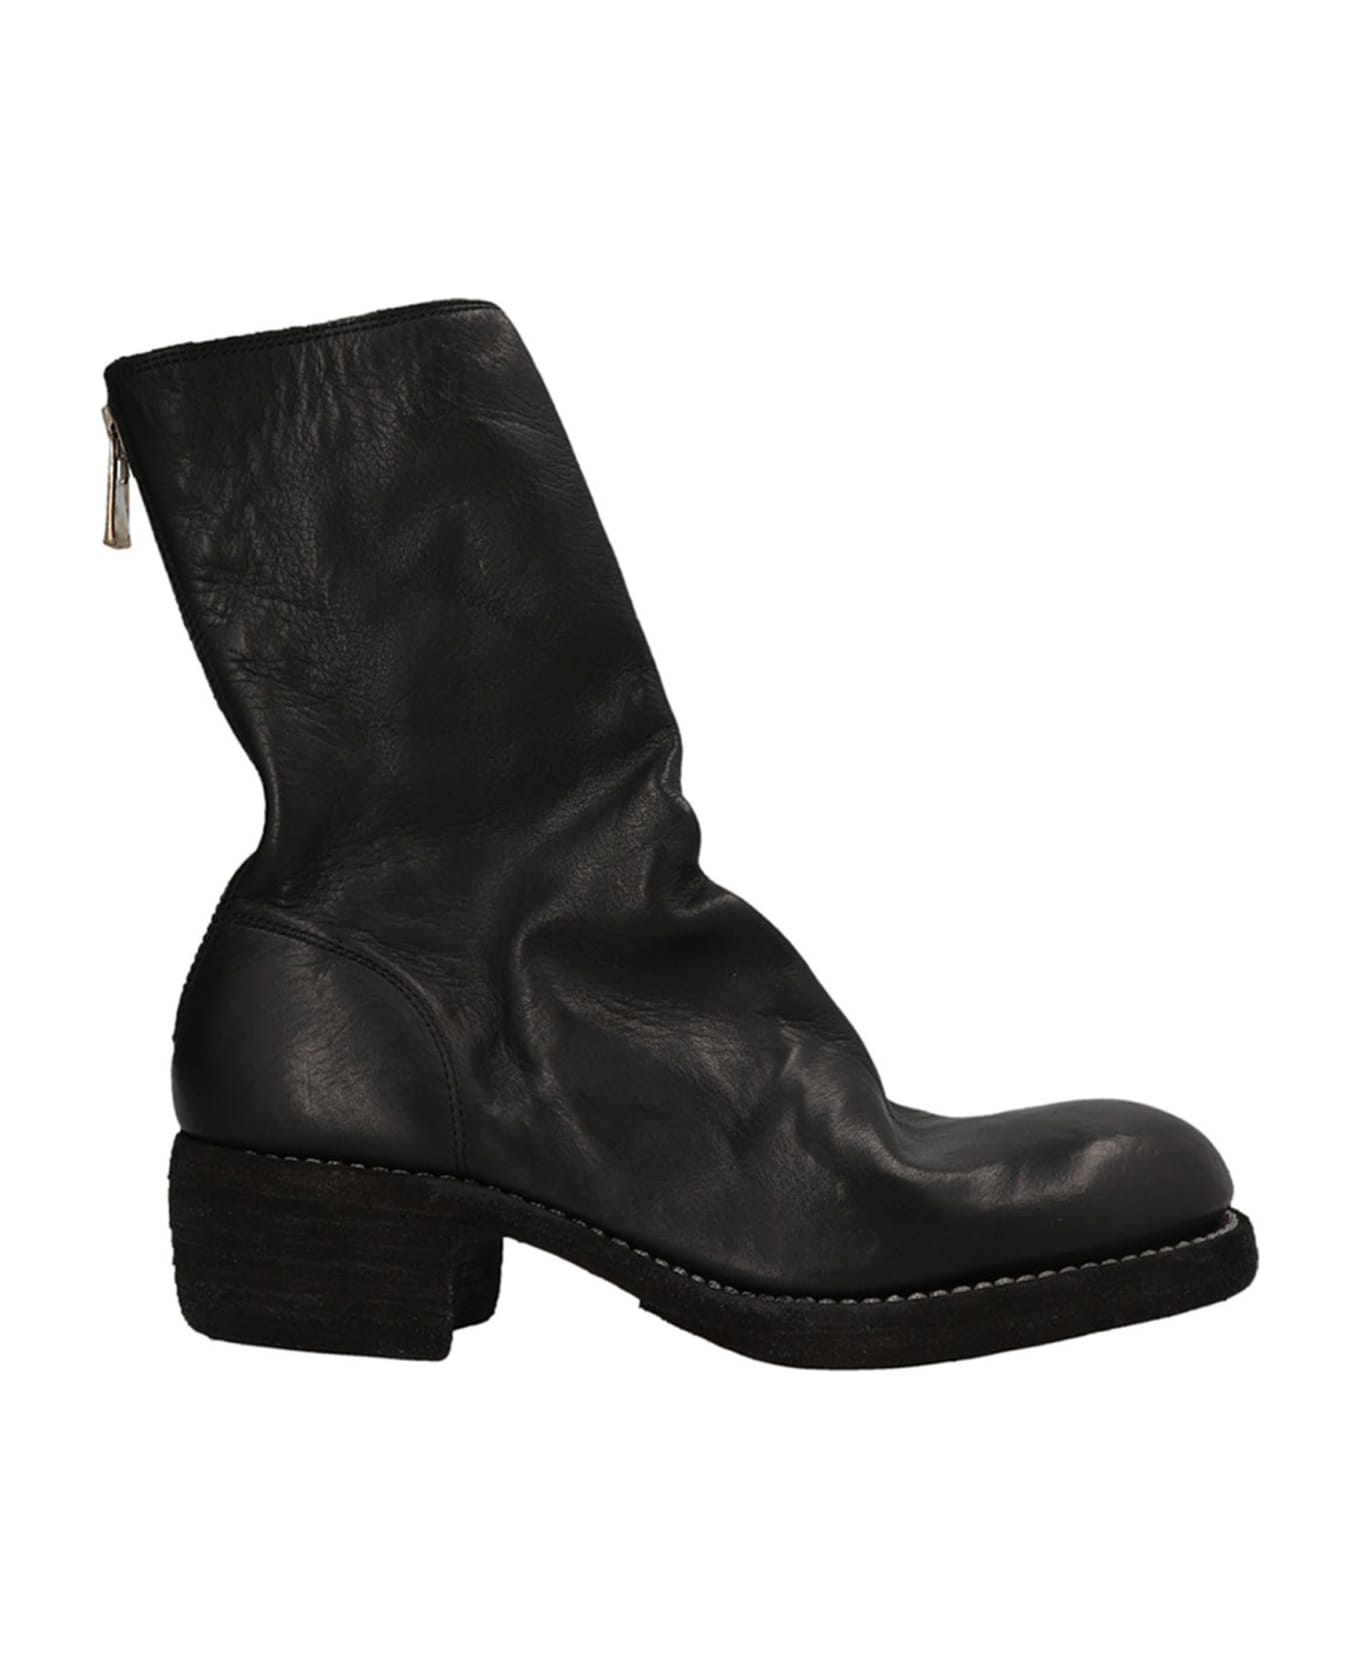 Guidi '788zx' Ankle Boots - Black   ブーツ